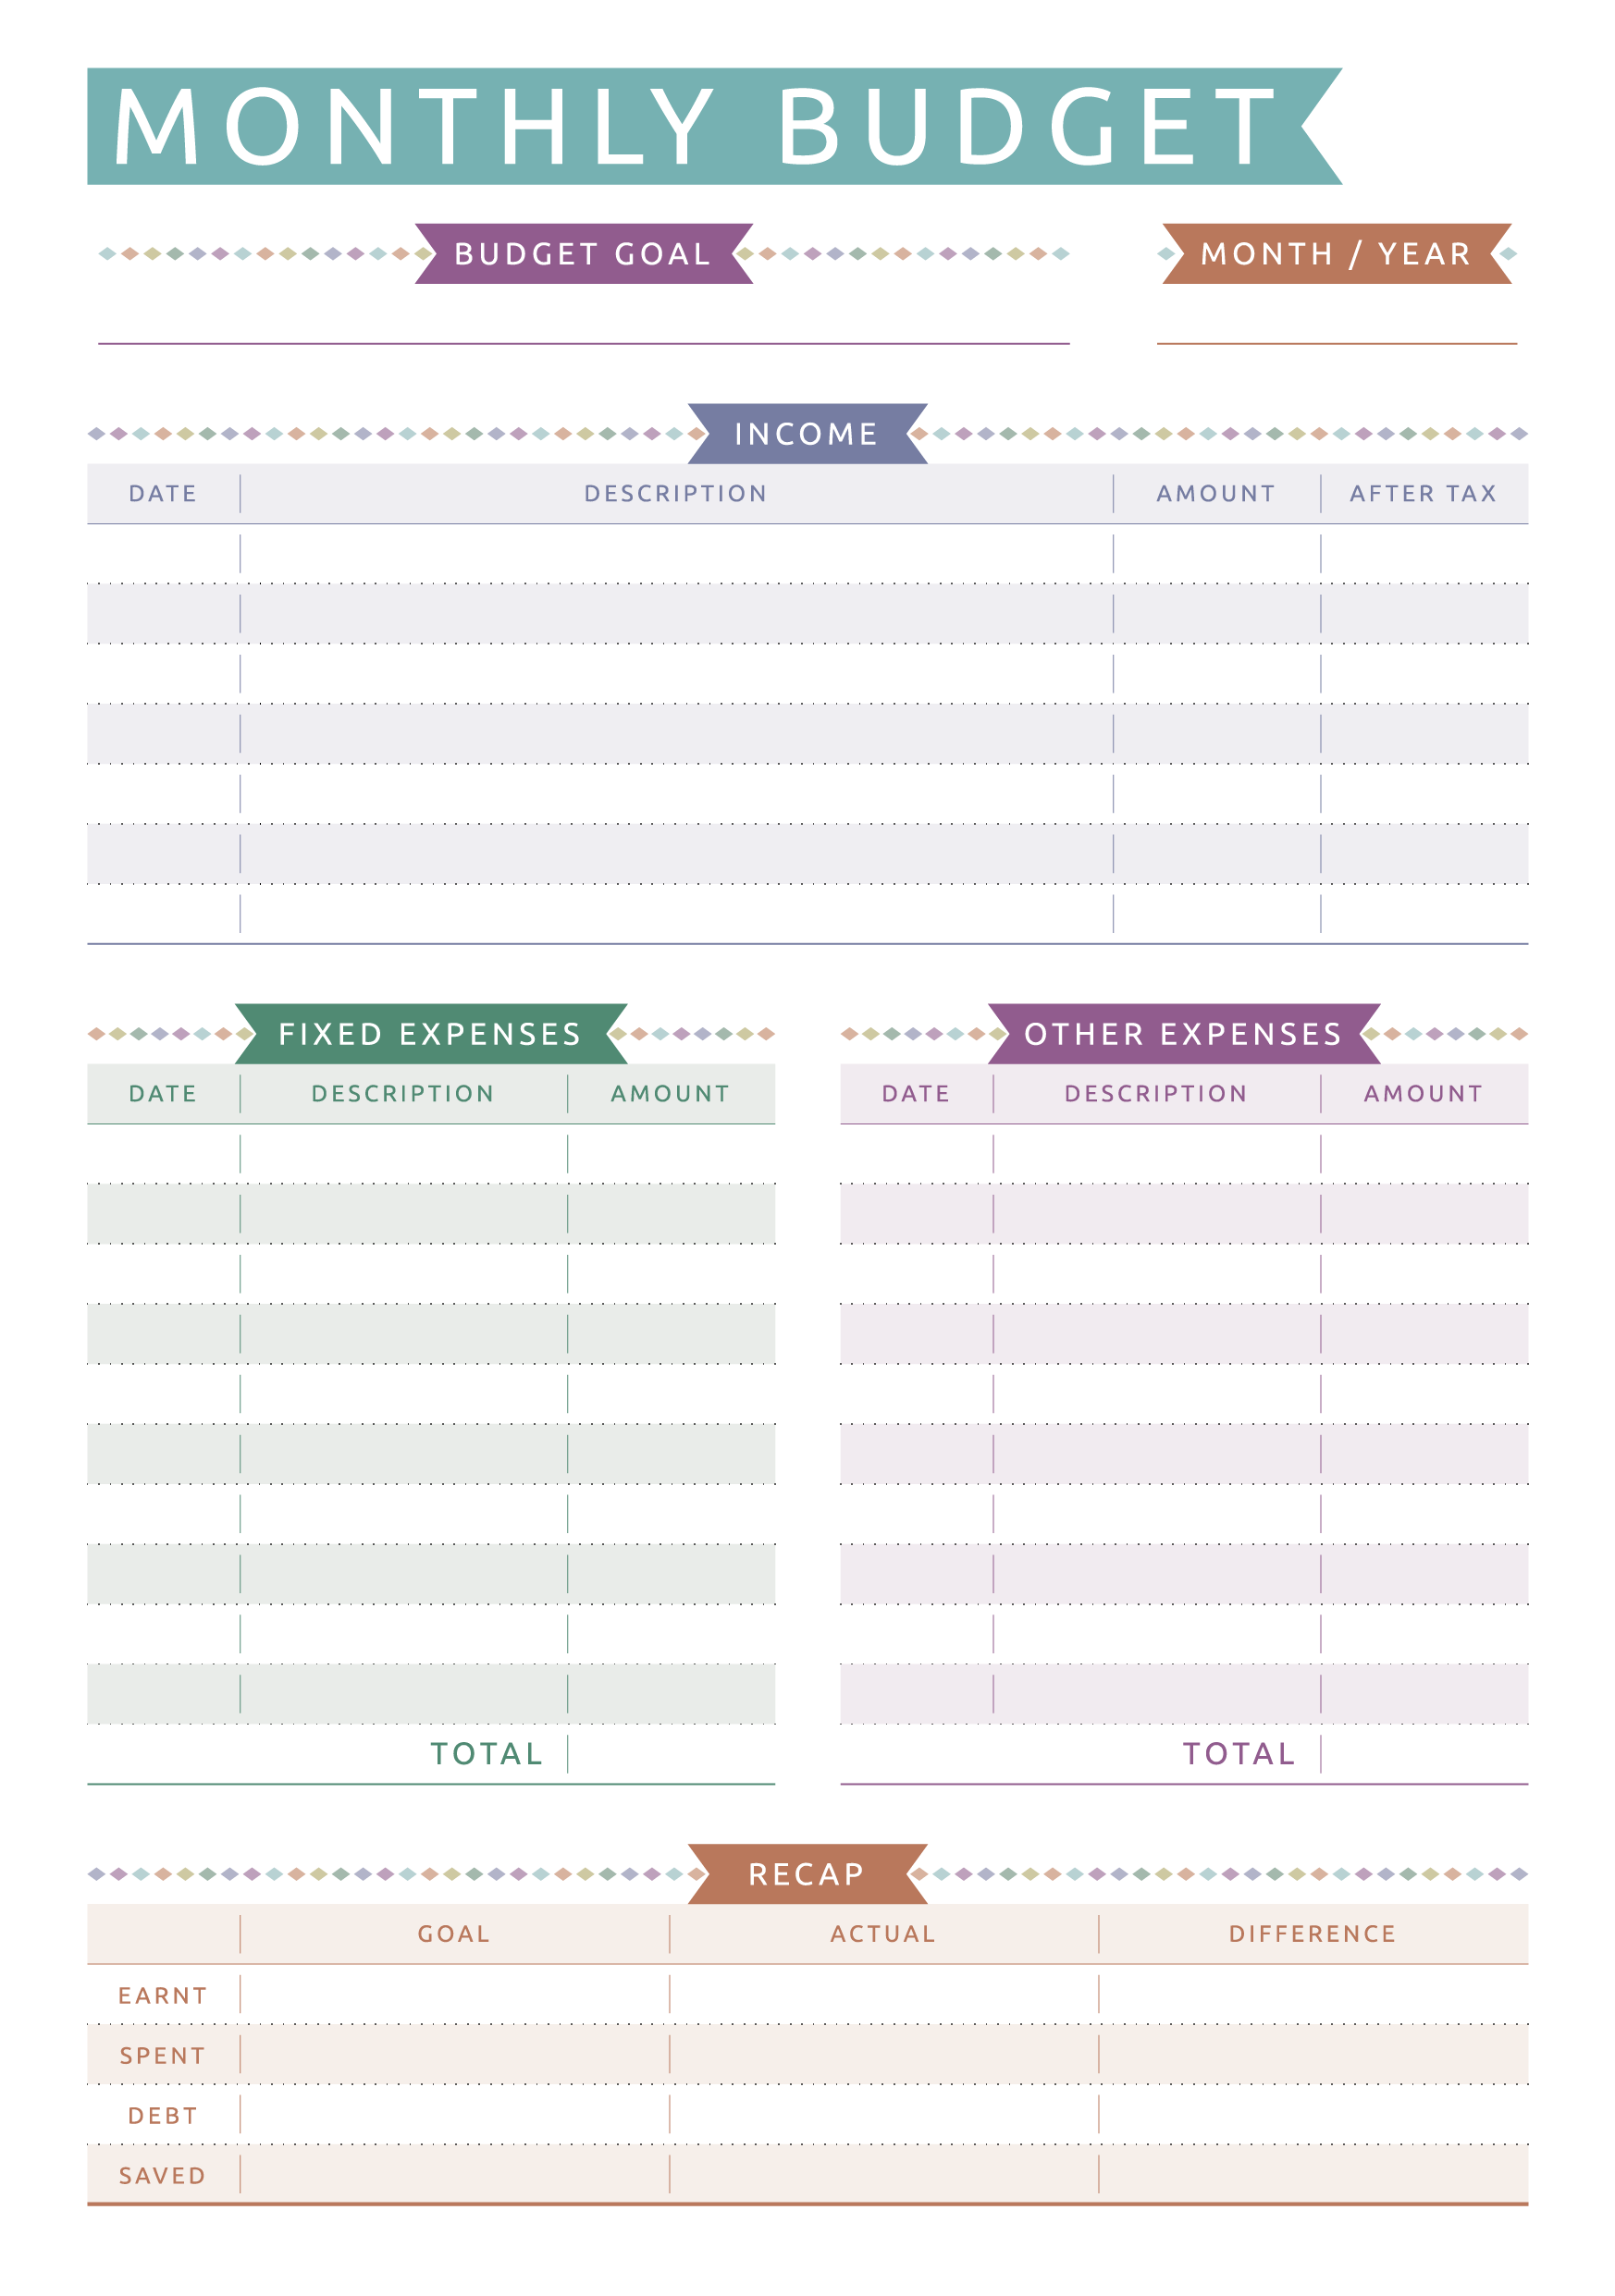 Basic Monthly Budget Worksheet Free Budgets Template - Dubai Expo Hub Intended For Basic Personal Budget Template With Regard To Basic Personal Budget Template